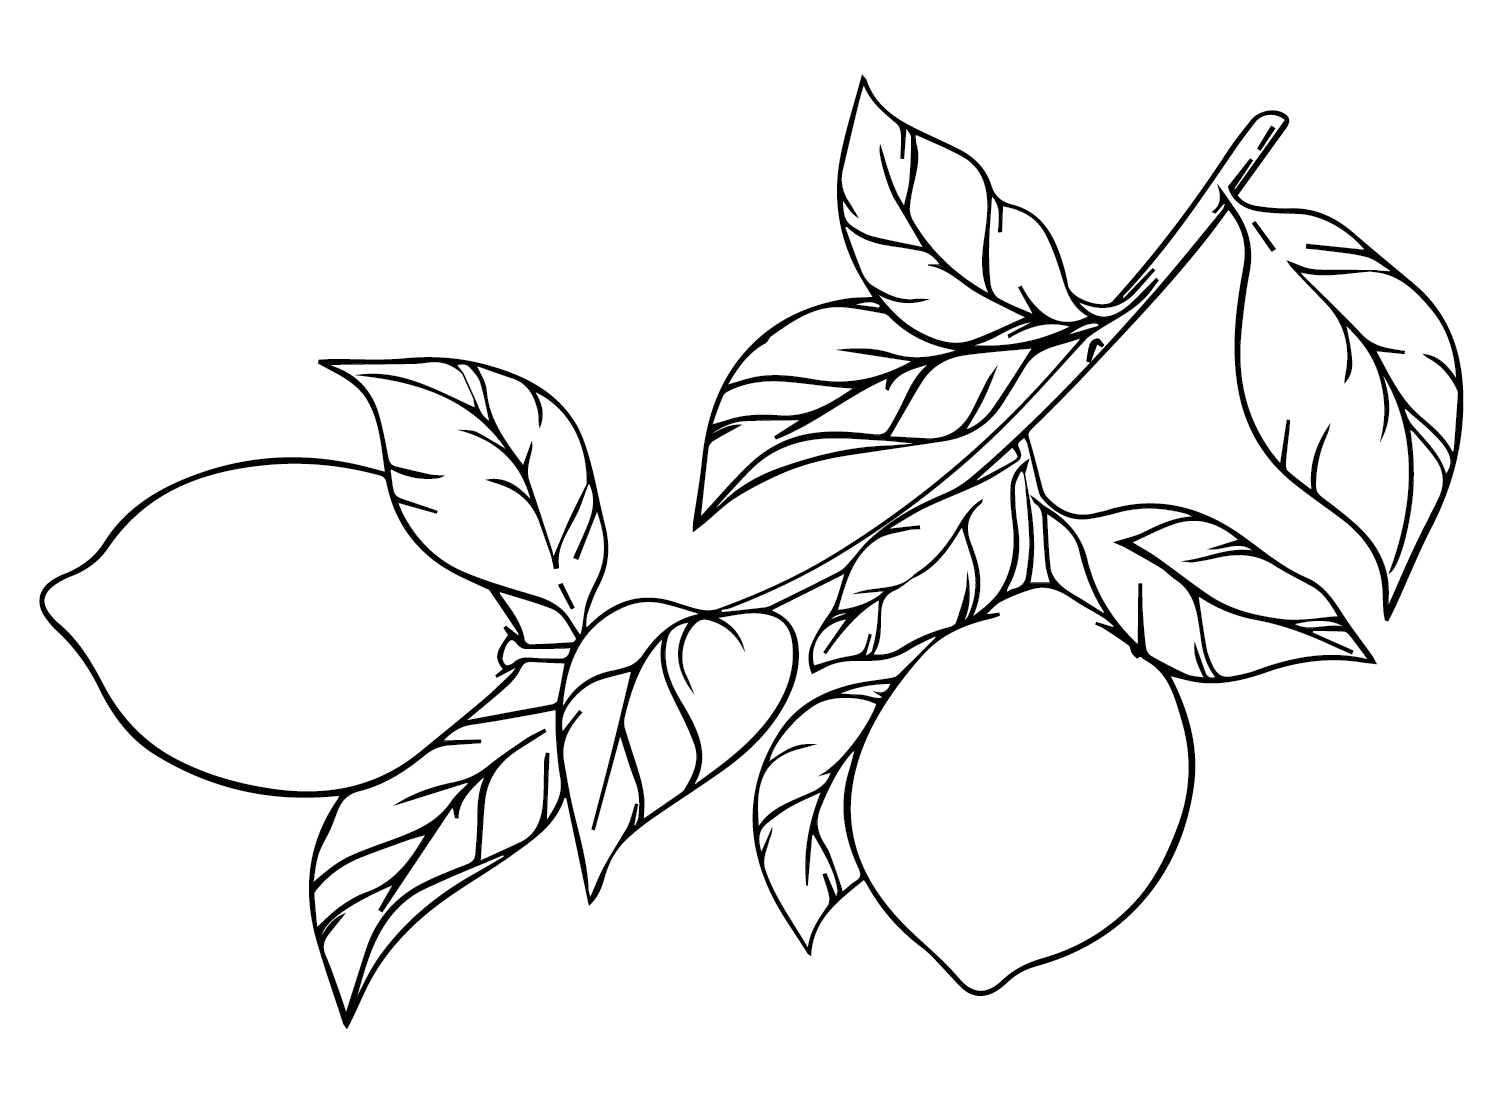 Lemons Branch Coloring Page